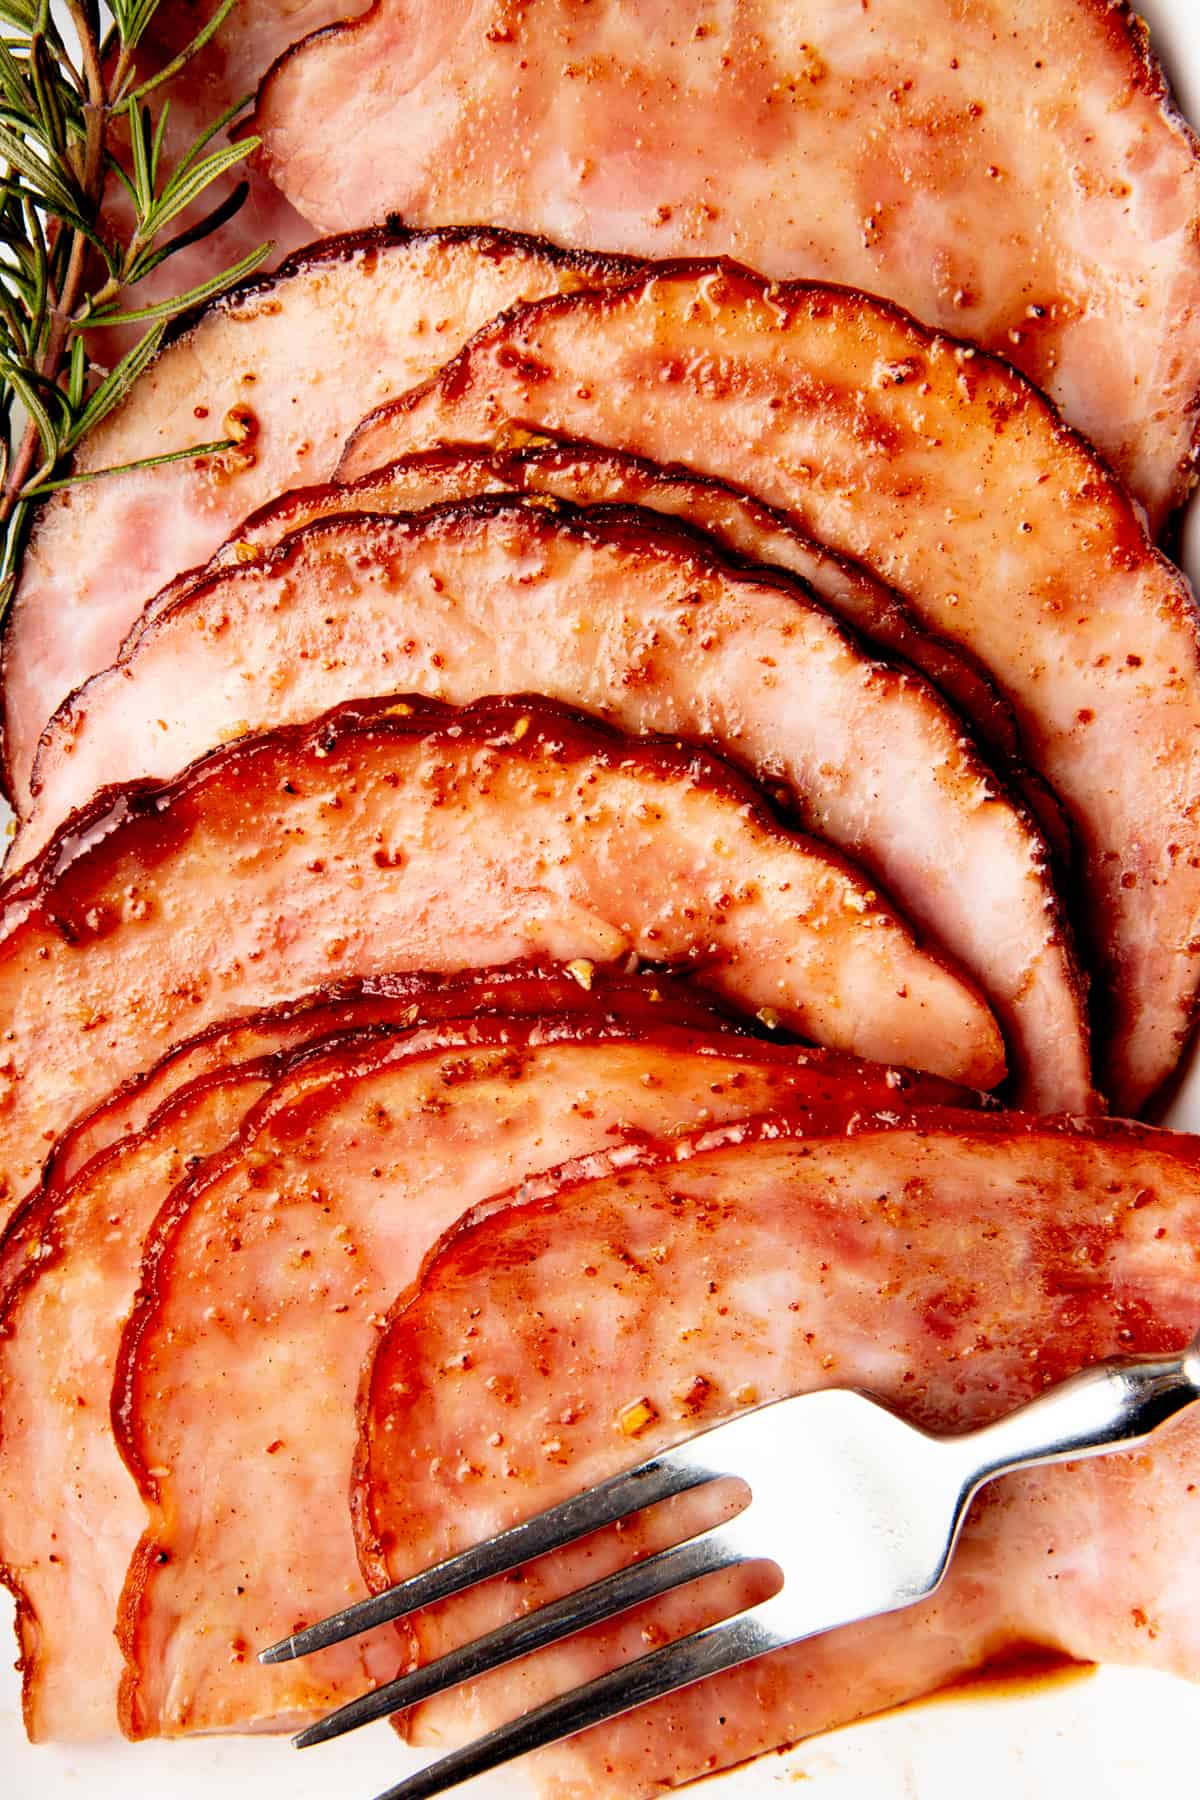 Ham is thinly sliced. A silver fork sits in the bottom right corner.